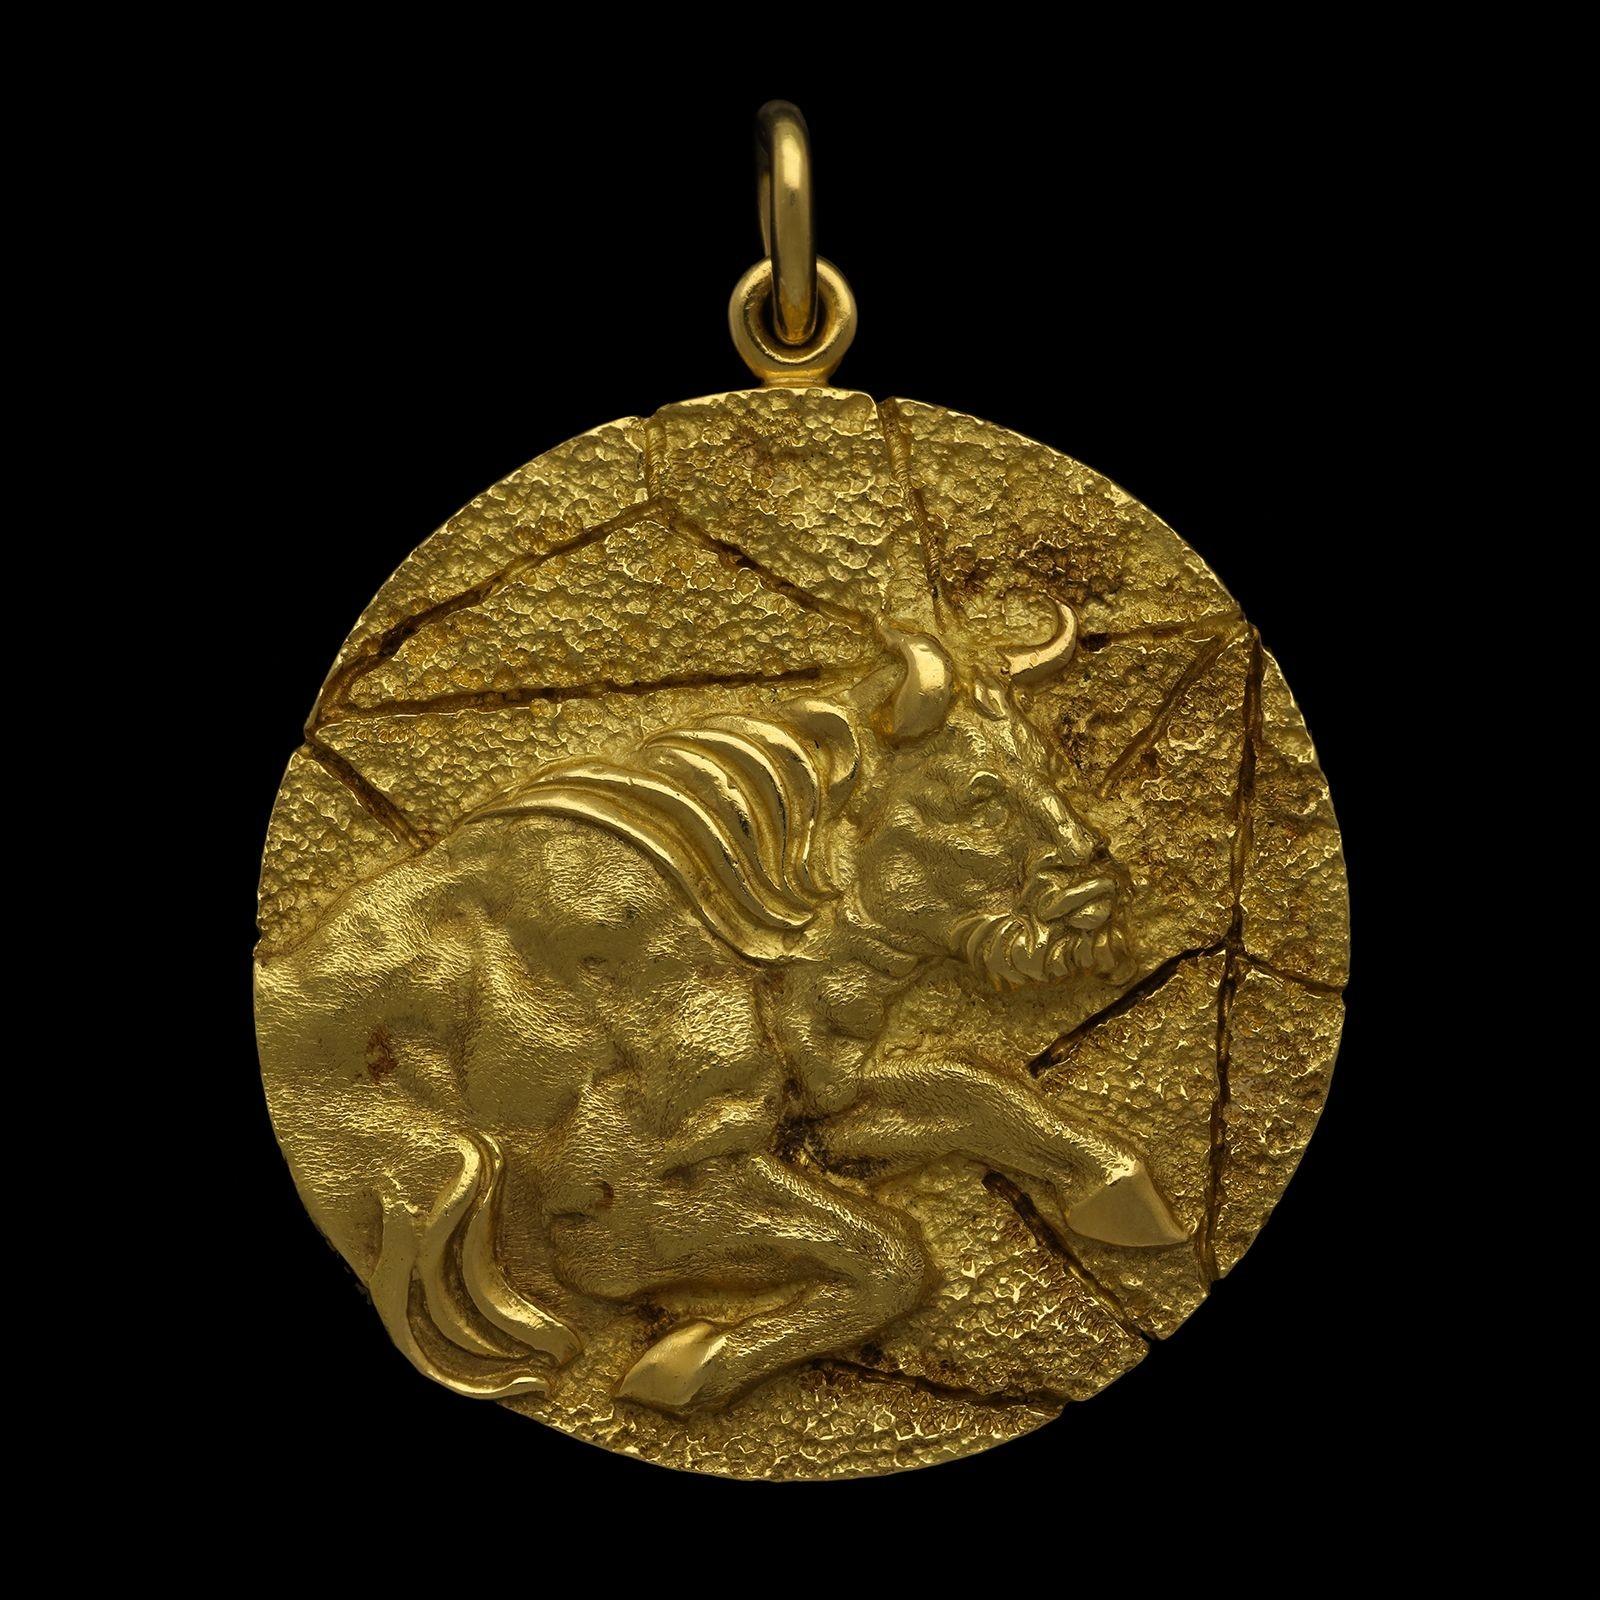 A large vintage Taurus zodiac pendant by Tiffany & Co, circa 1970s, the circular disc pendant measuring 1.75” in diameter and formed of 18ct gold with a textured finish, on one side it depicts the front half of a rearing bull in profile in high